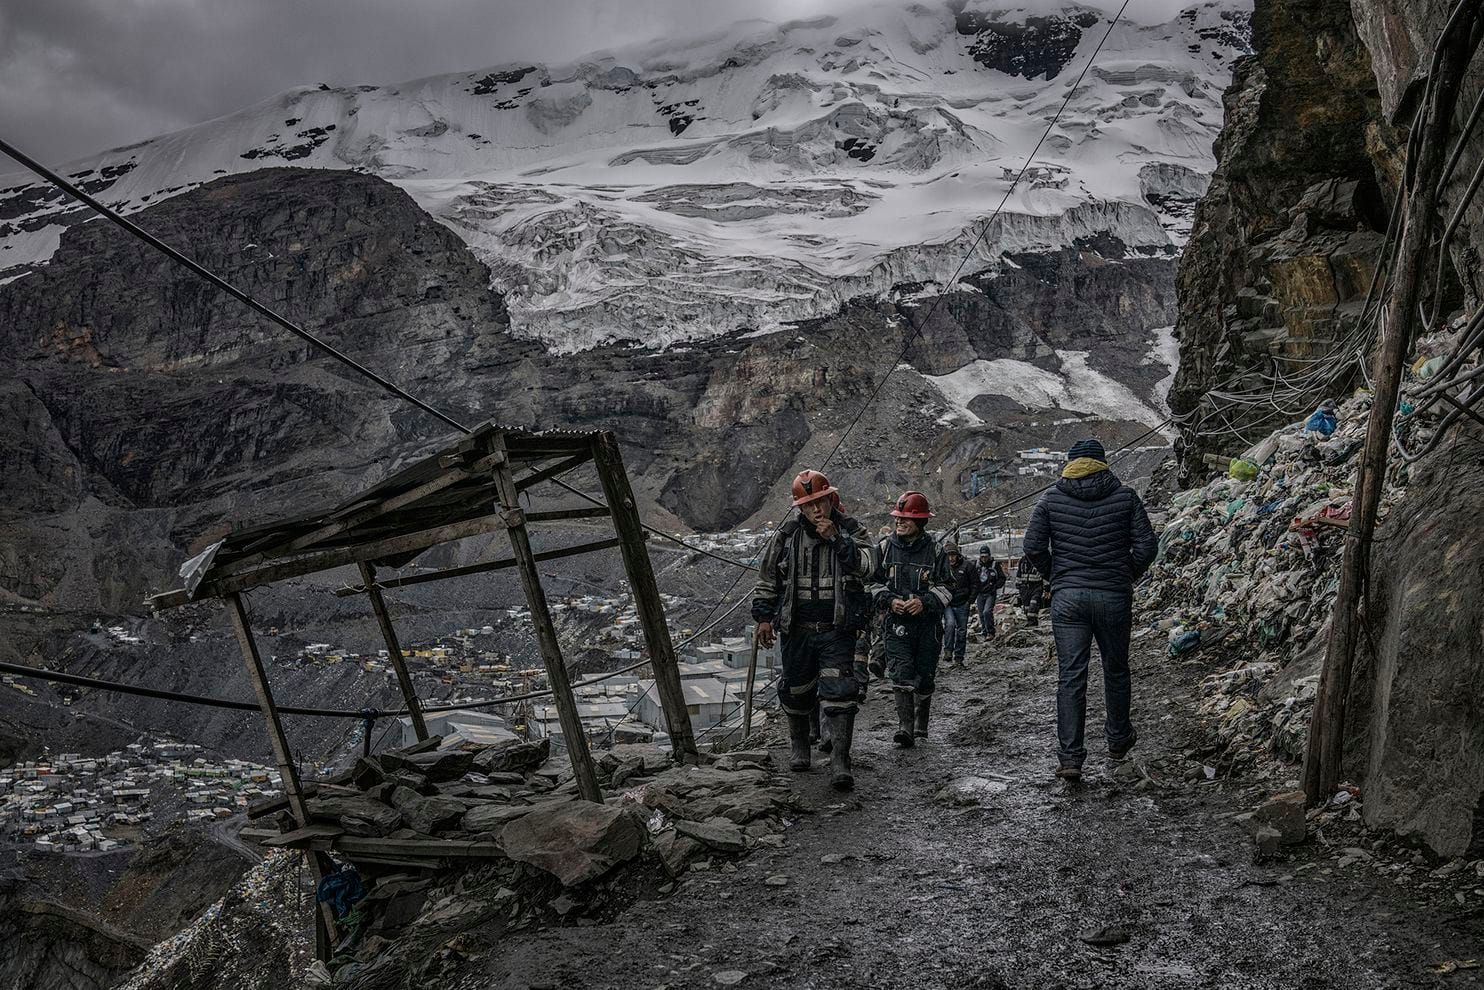 Workers return from the mines at lunch time. Peru, 2019. Image by James Whitlow Delano.